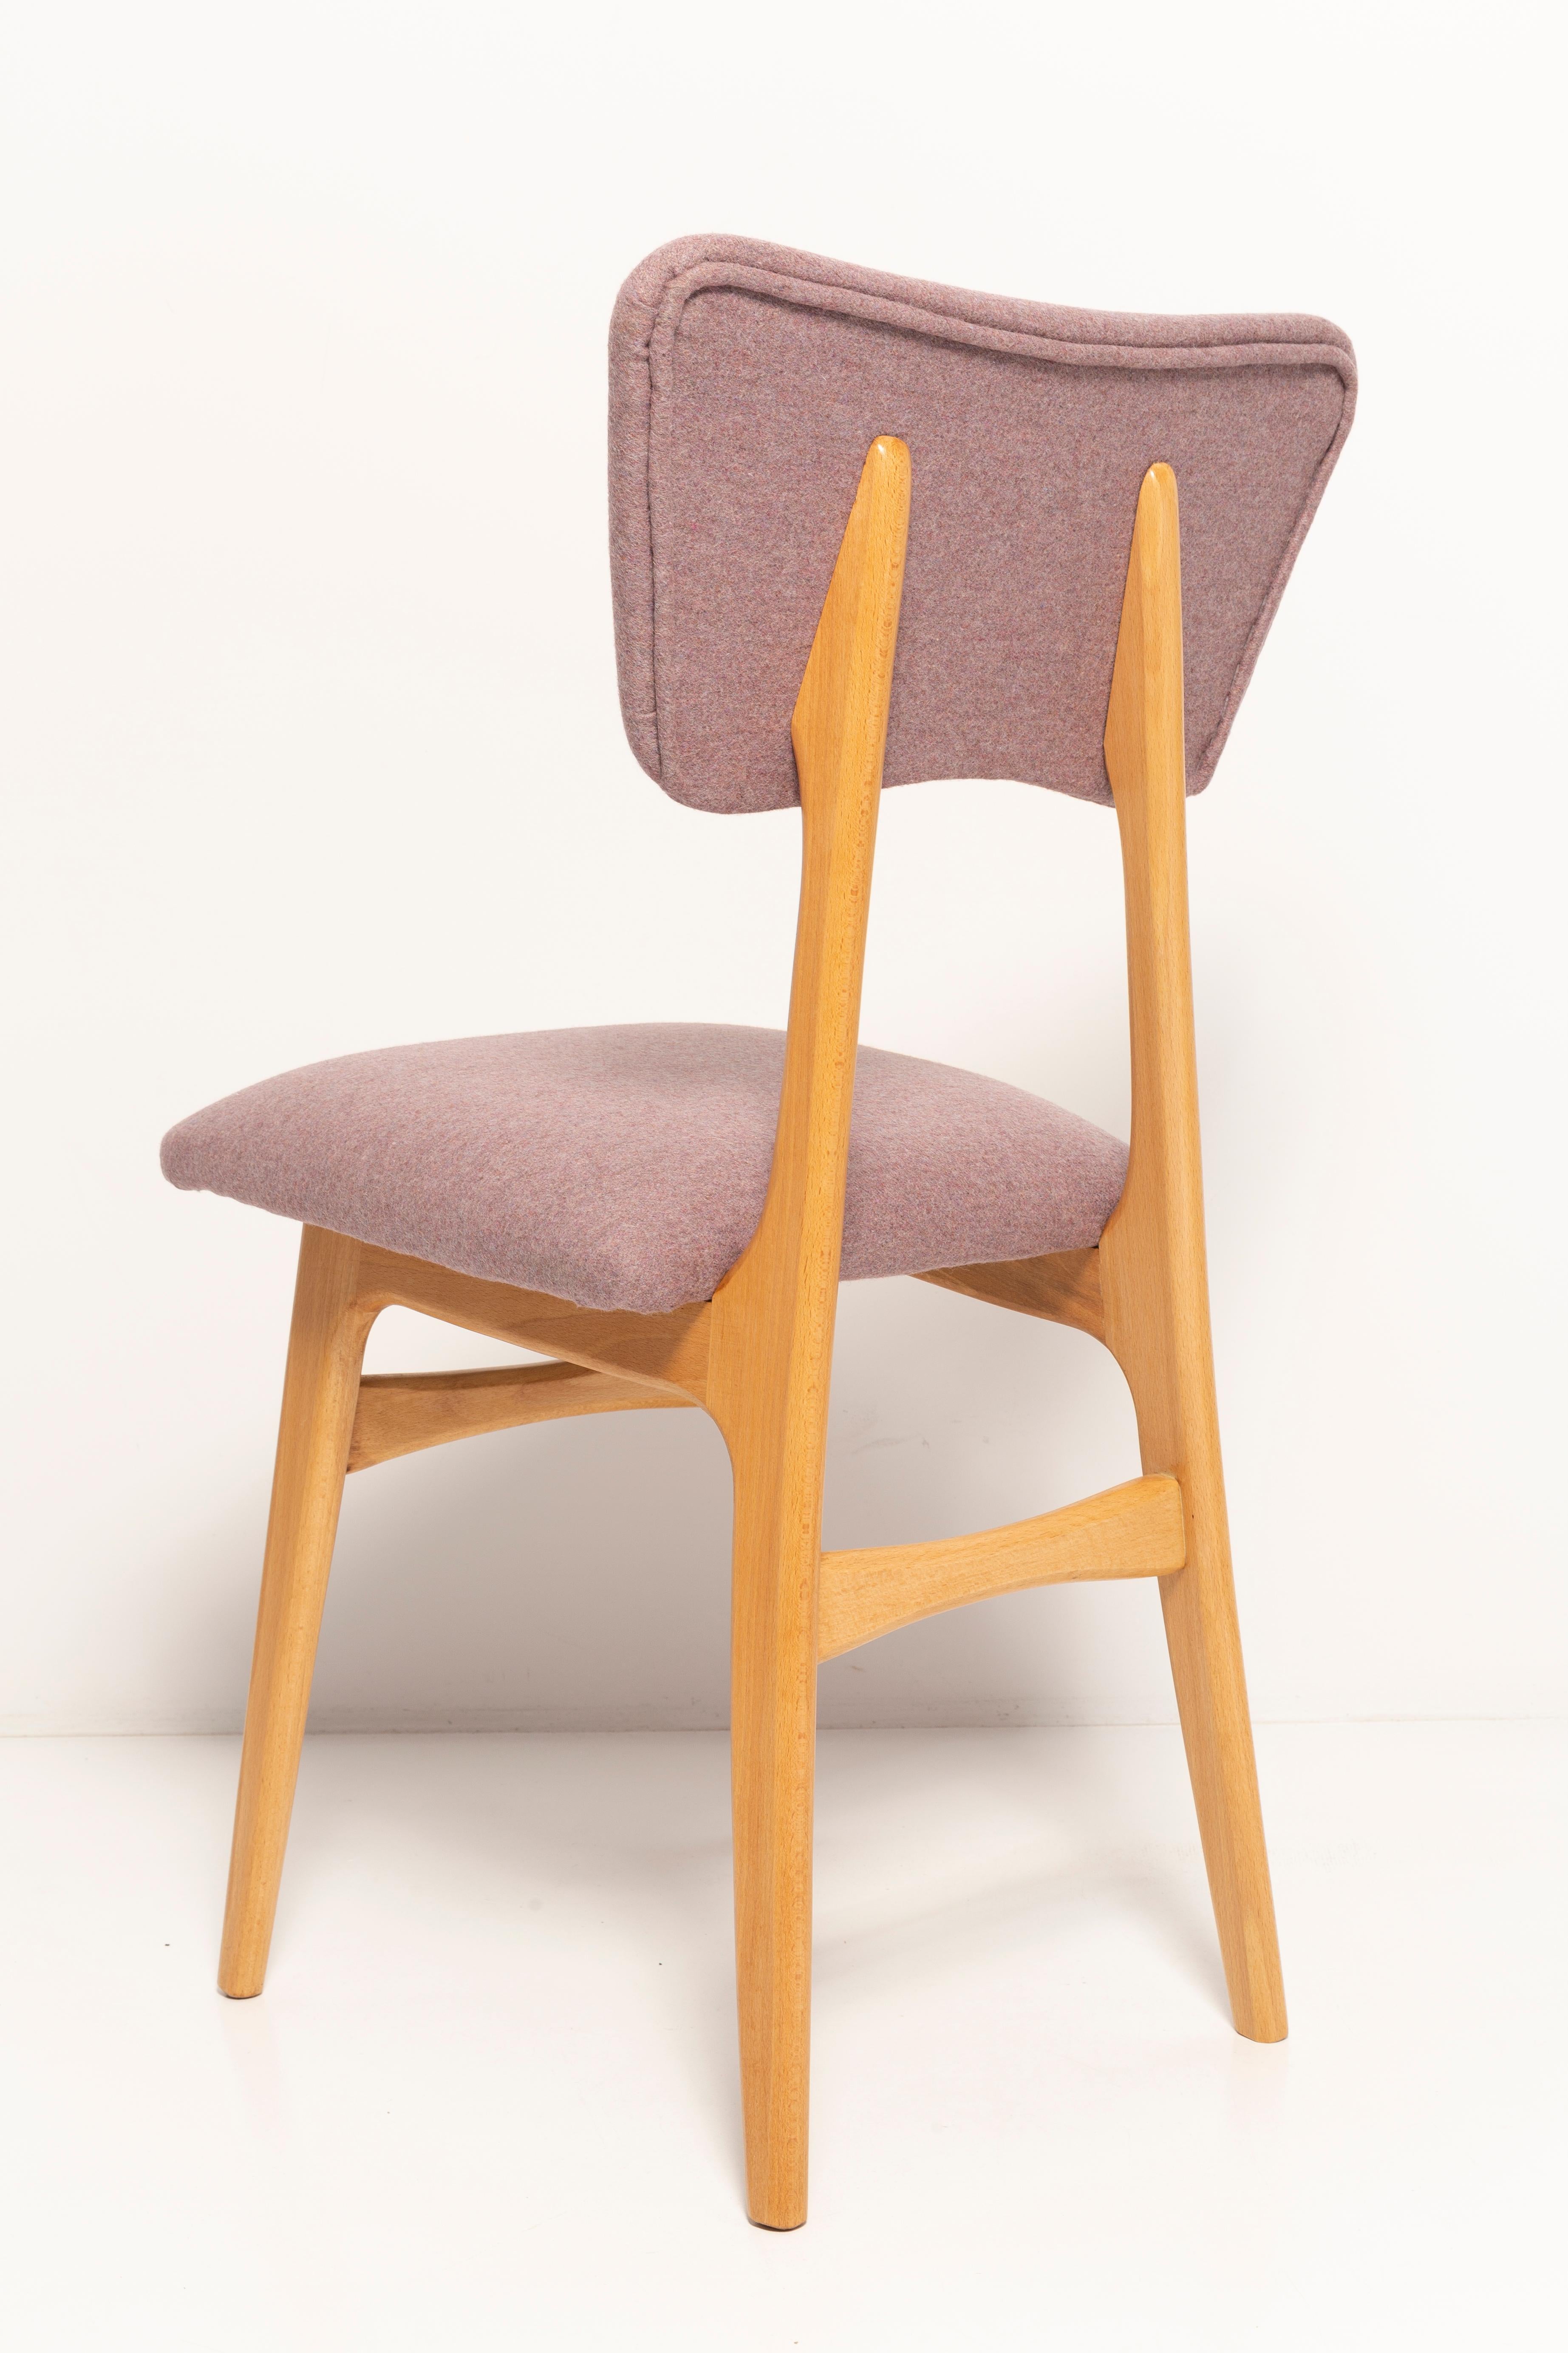 Nine 20th Century Butterfly Dining Chairs, Pink Wool, Light Wood, Europe, 1960s For Sale 3